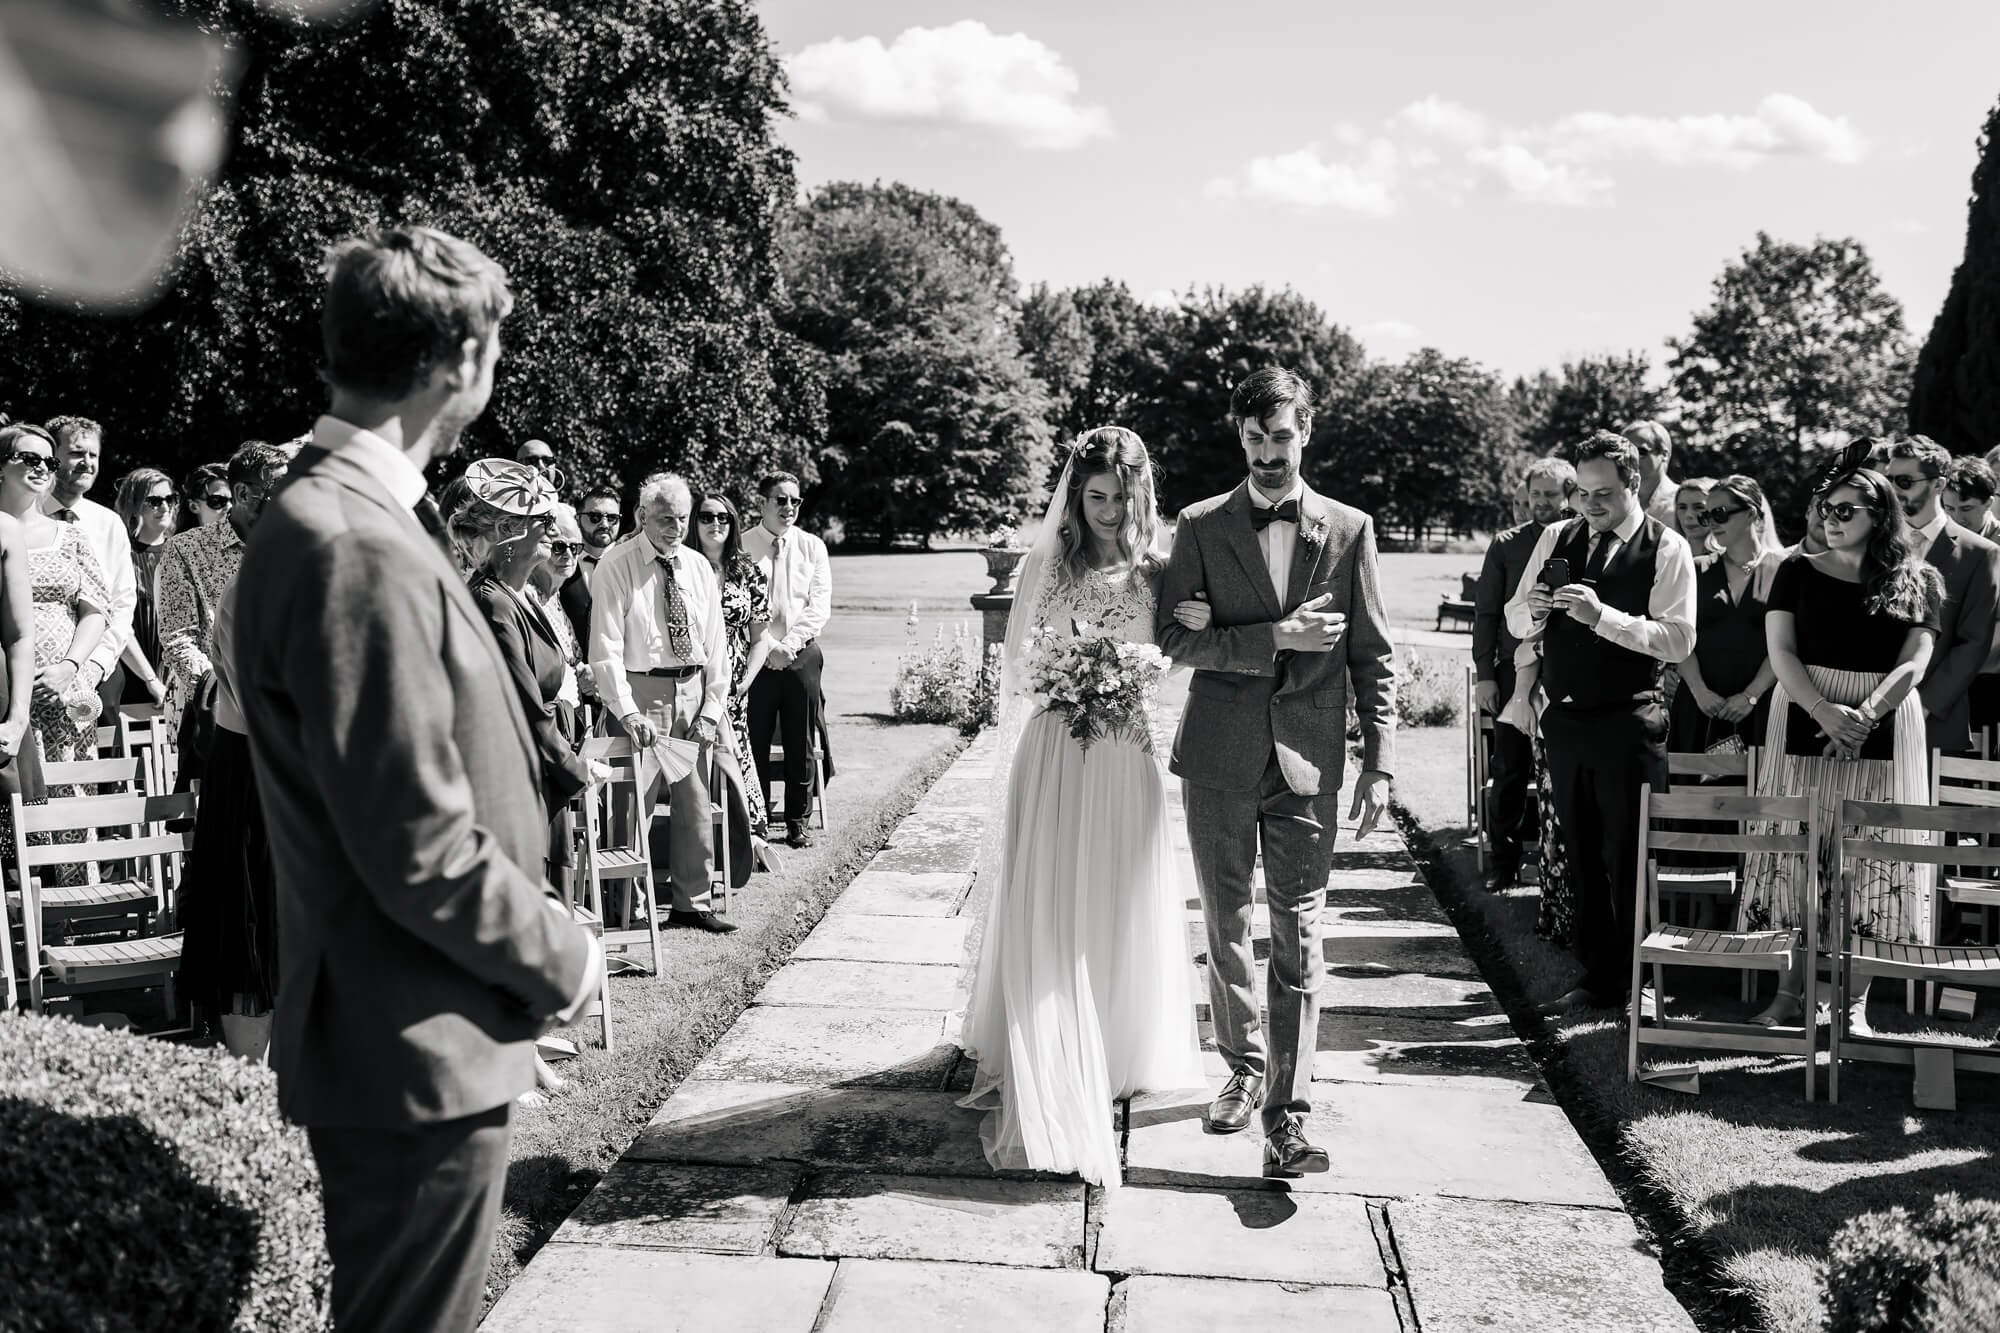 Groom sees his bride for the first time at a Yorkshire wedding